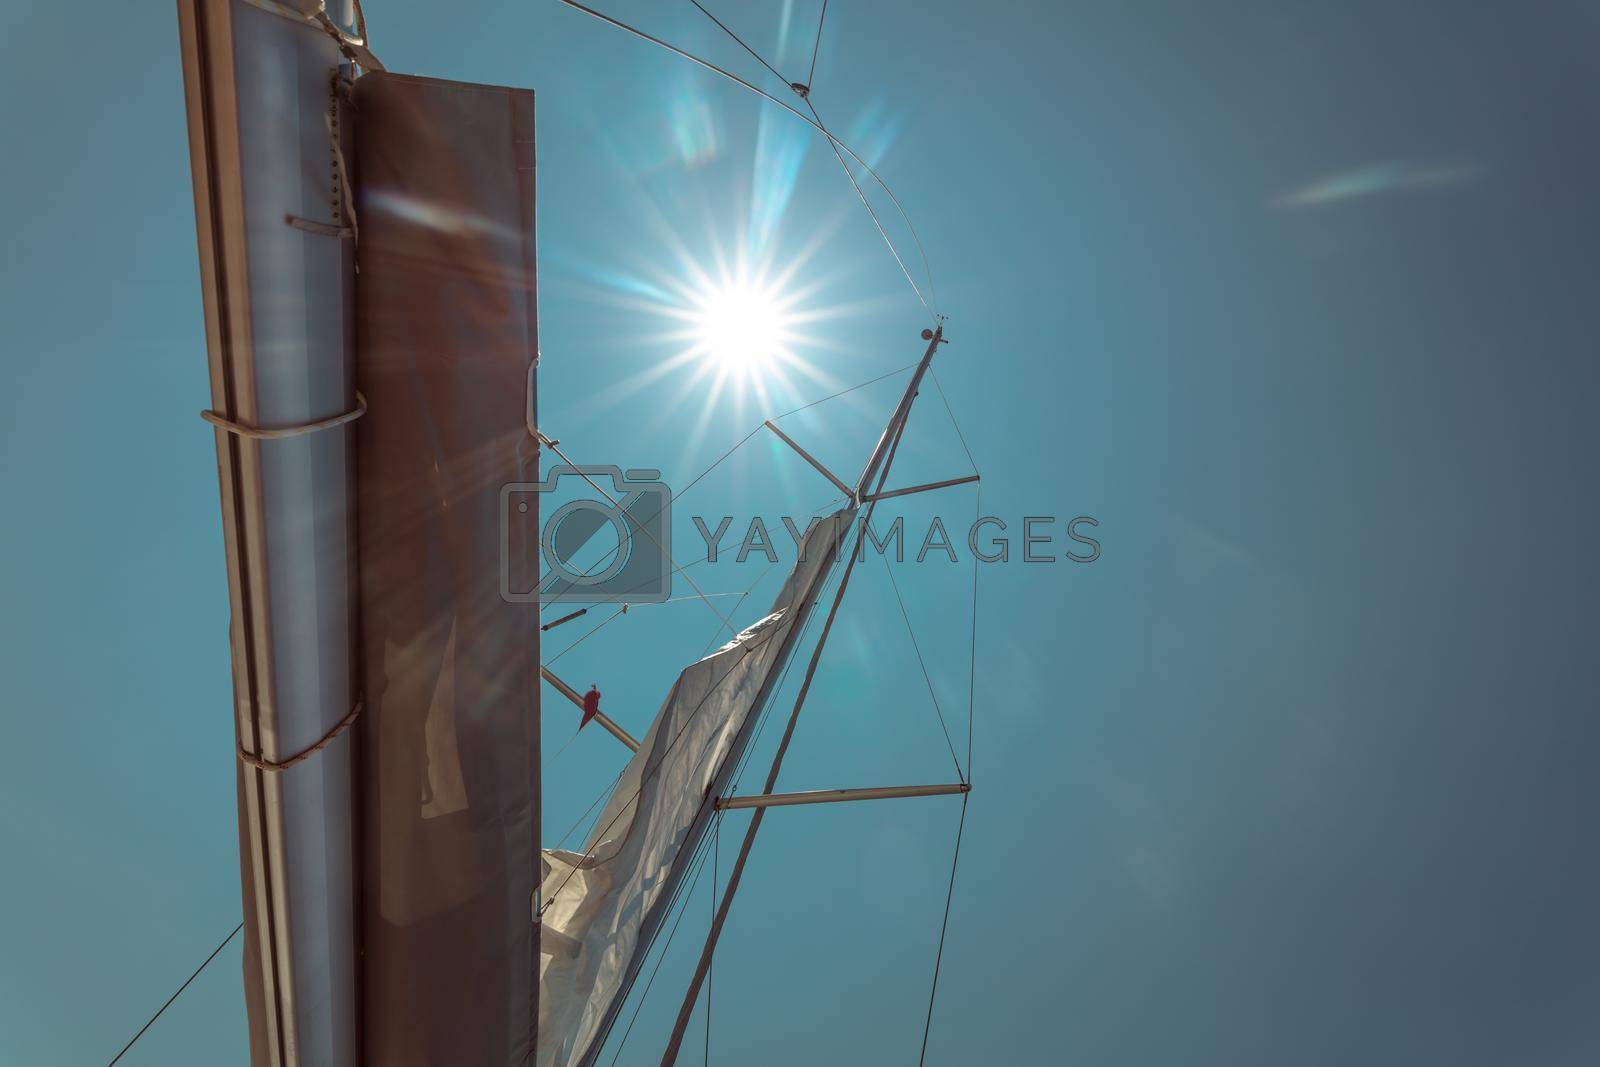 Royalty free image of Sailing in Bright Sunny Day by Anna_Omelchenko